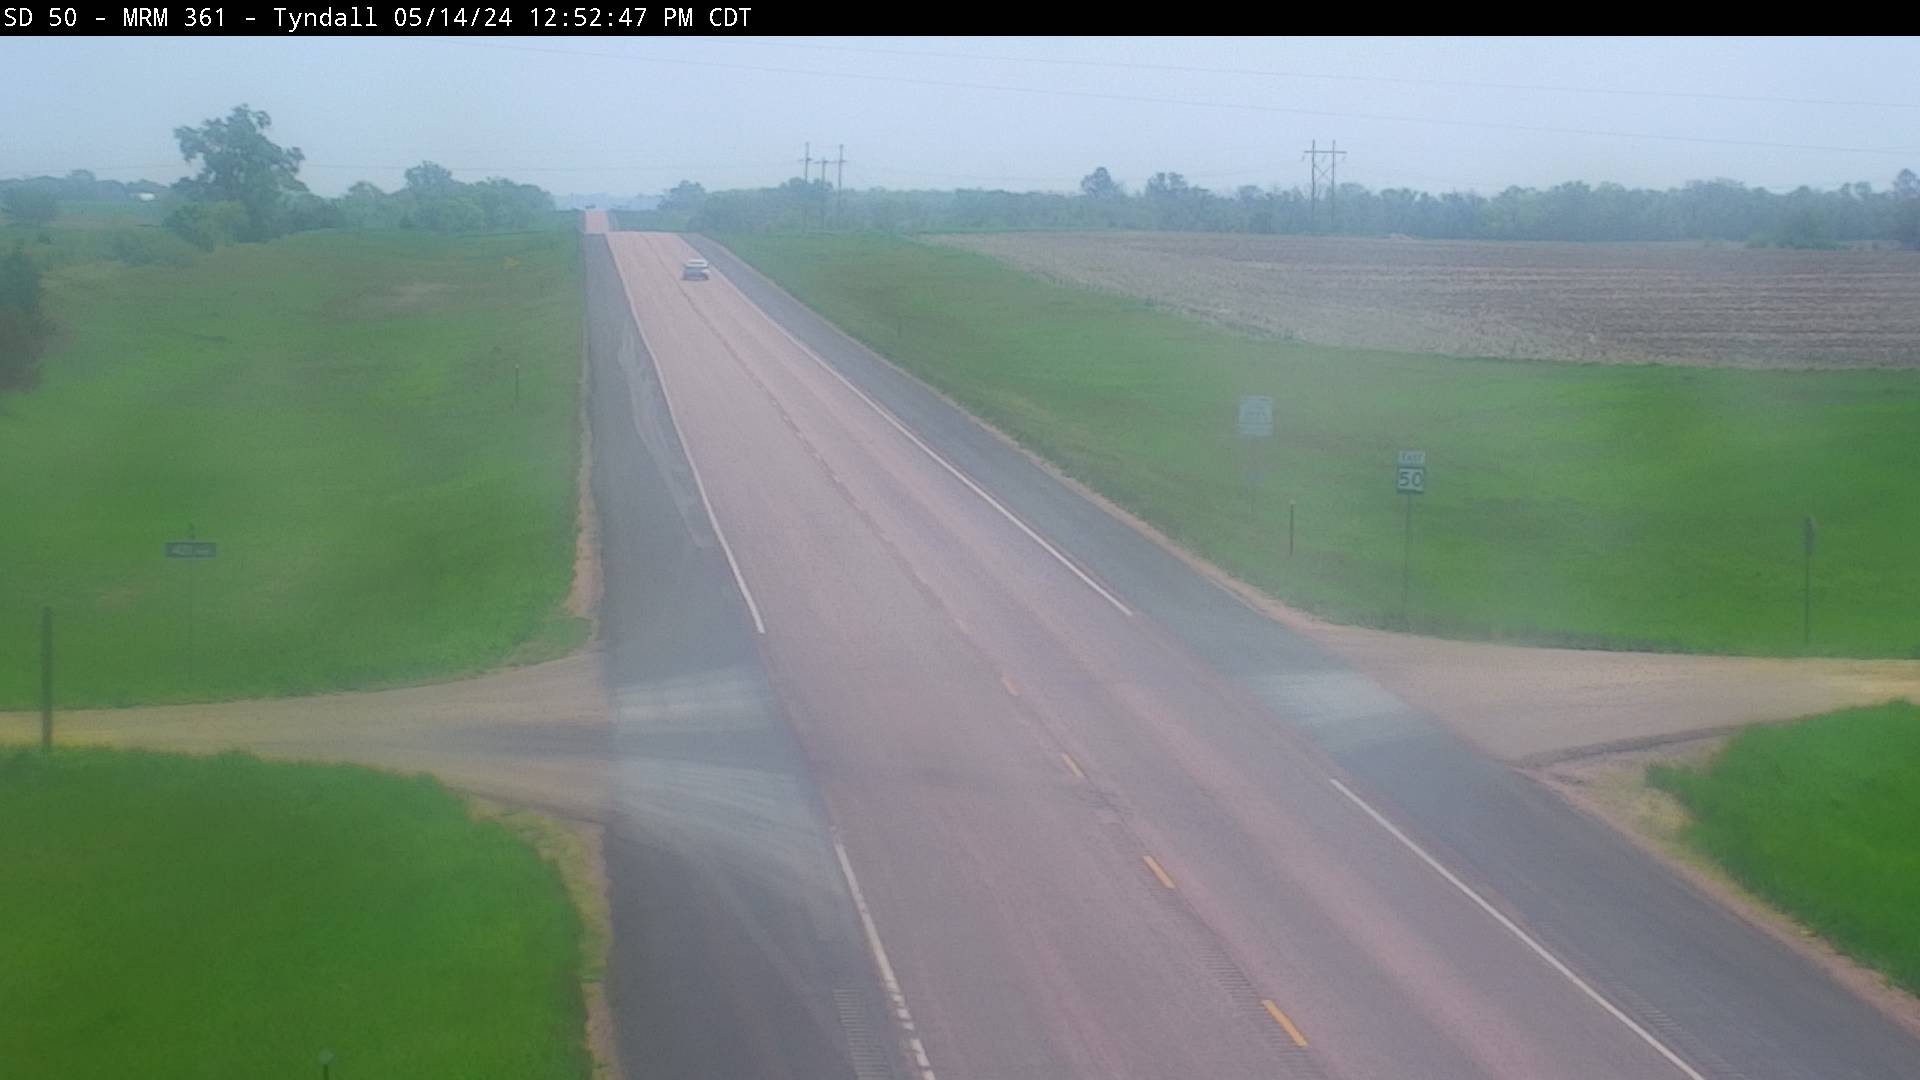 Traffic Cam 5 miles east of town along SD-50 @ MP 361 - East Player